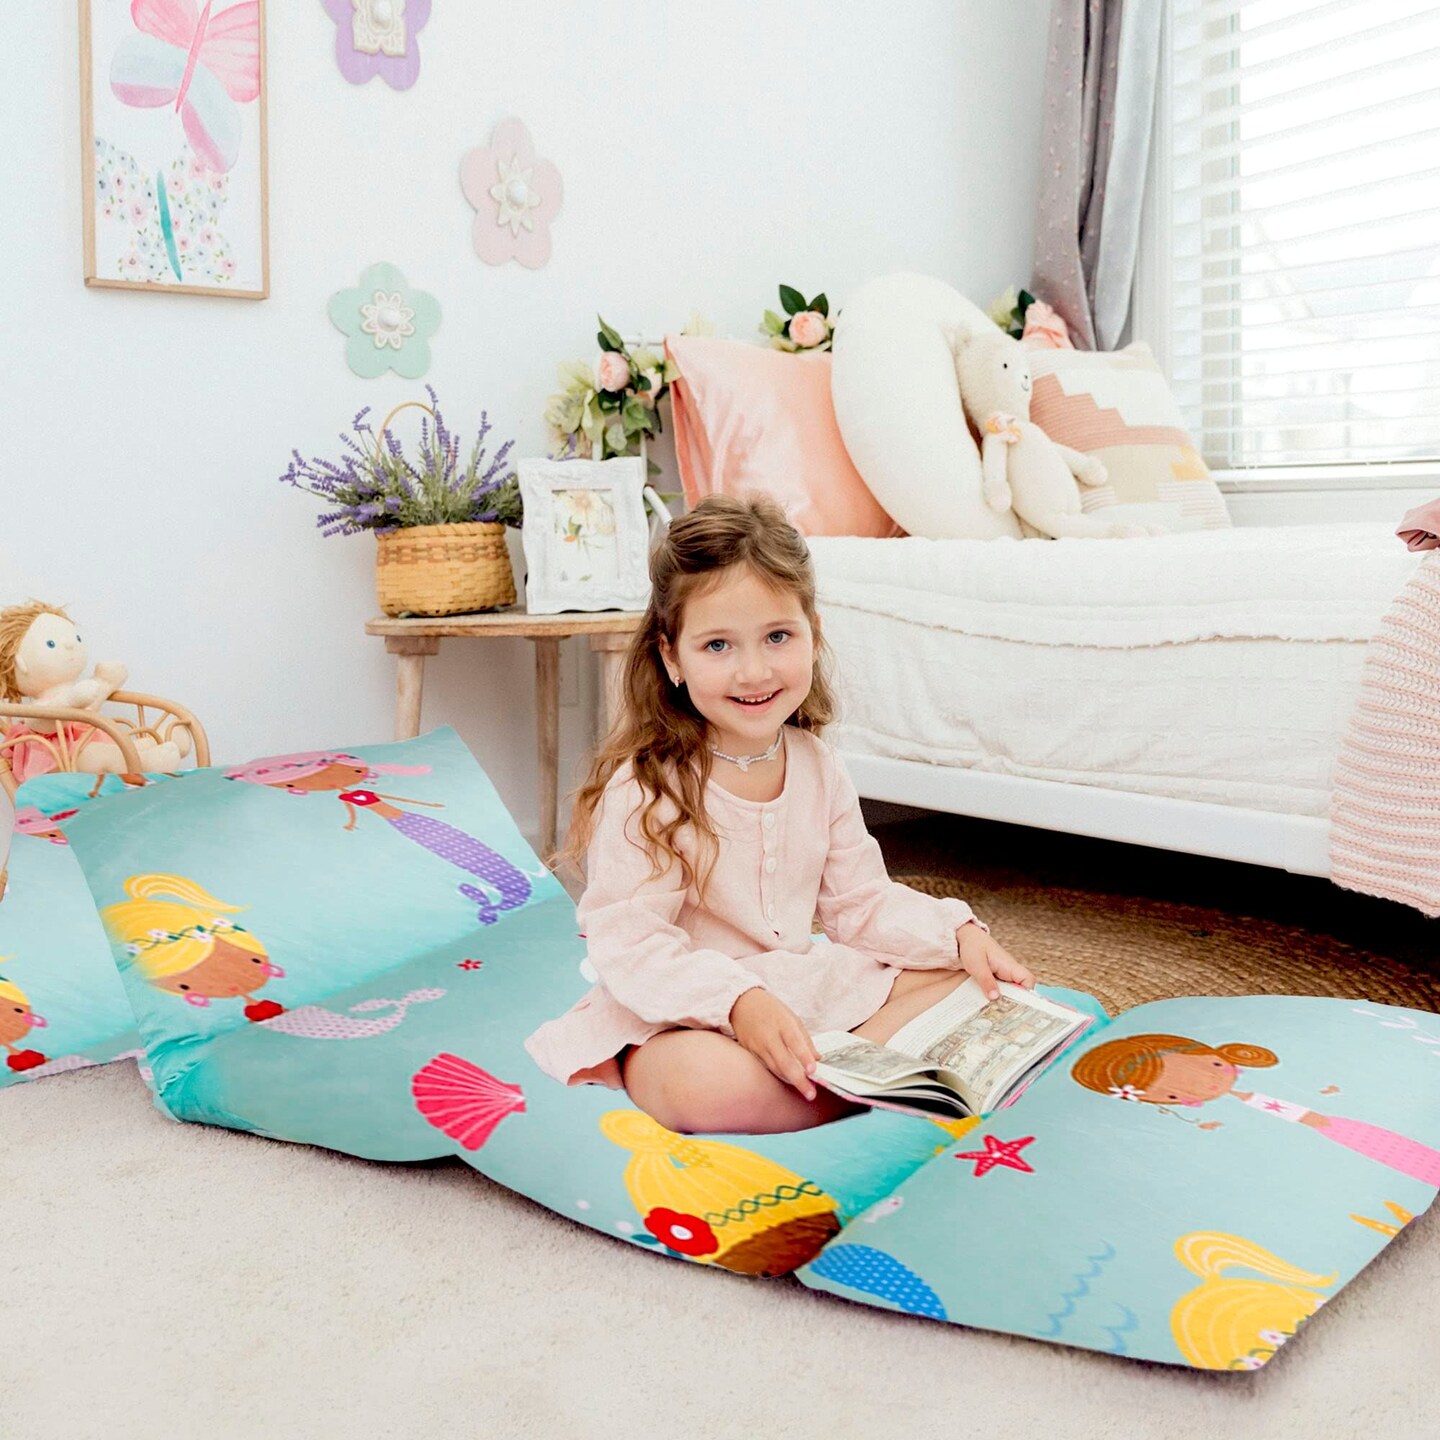 Butterfly Craze Floor Pillow Case, Mattress Bed Lounger Cover, Mermaid Aqua, King, Cozy Seating Solution for Kids &#x26; Adults, Recliner Cushion, for Reading, TV Time, Sleepovers, &#x26; Toddler Nap Mat